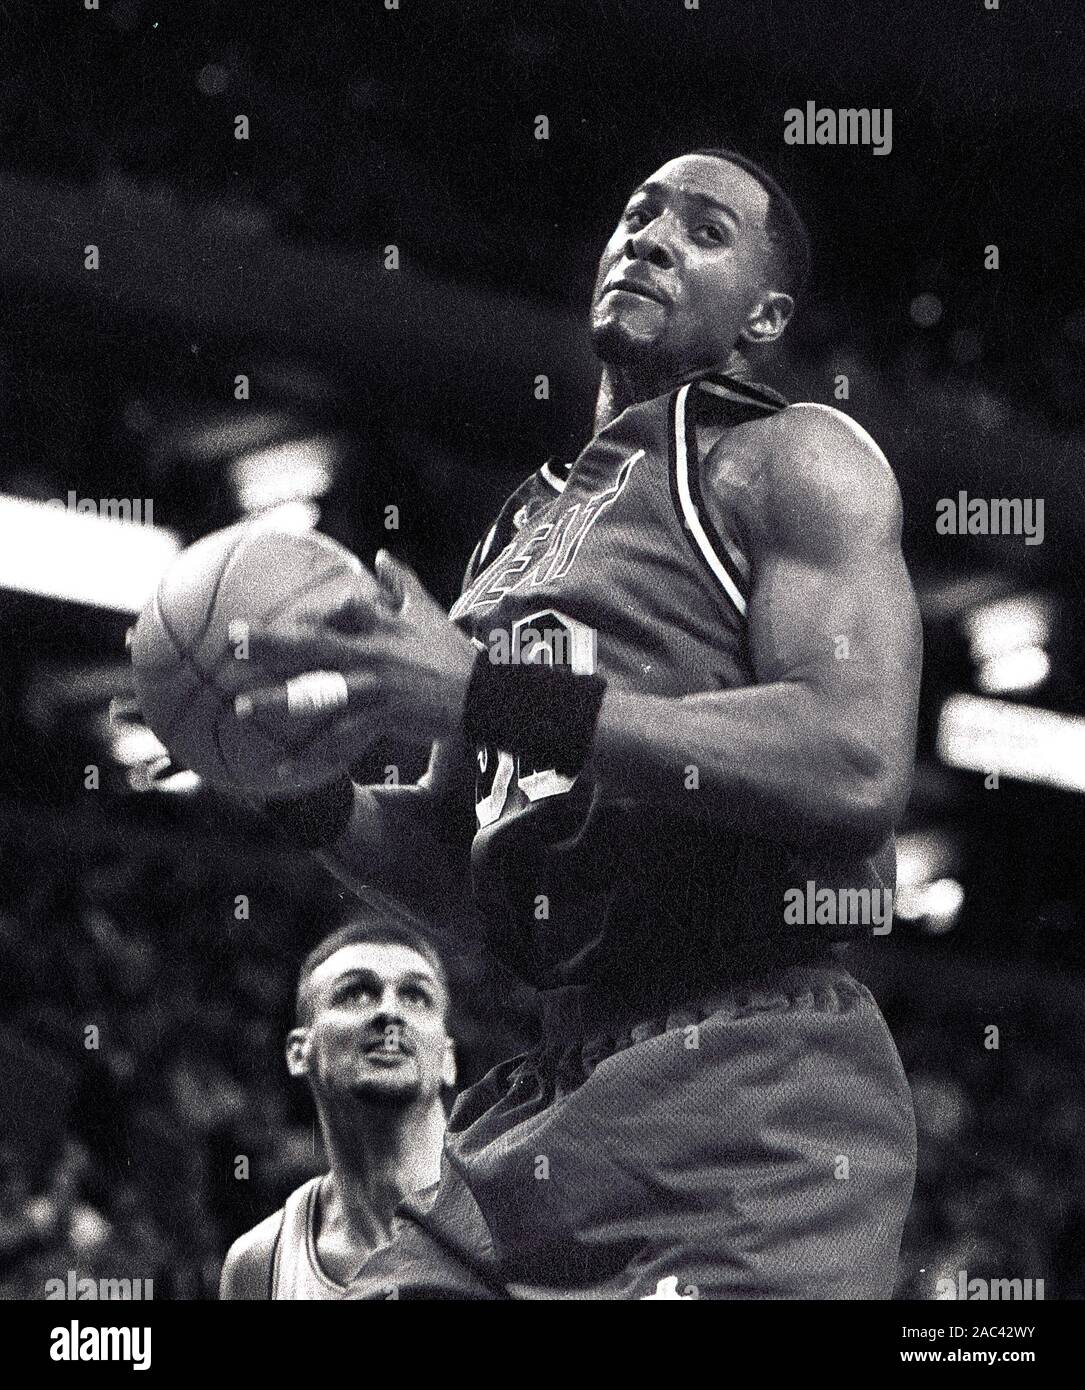 Miami Heat #33 Alonzo Mourning in basketball game action against the Boston Celtics at the Fleet Center in Boston Ma USA mar26,1998 photo by bill belknap Stock Photo